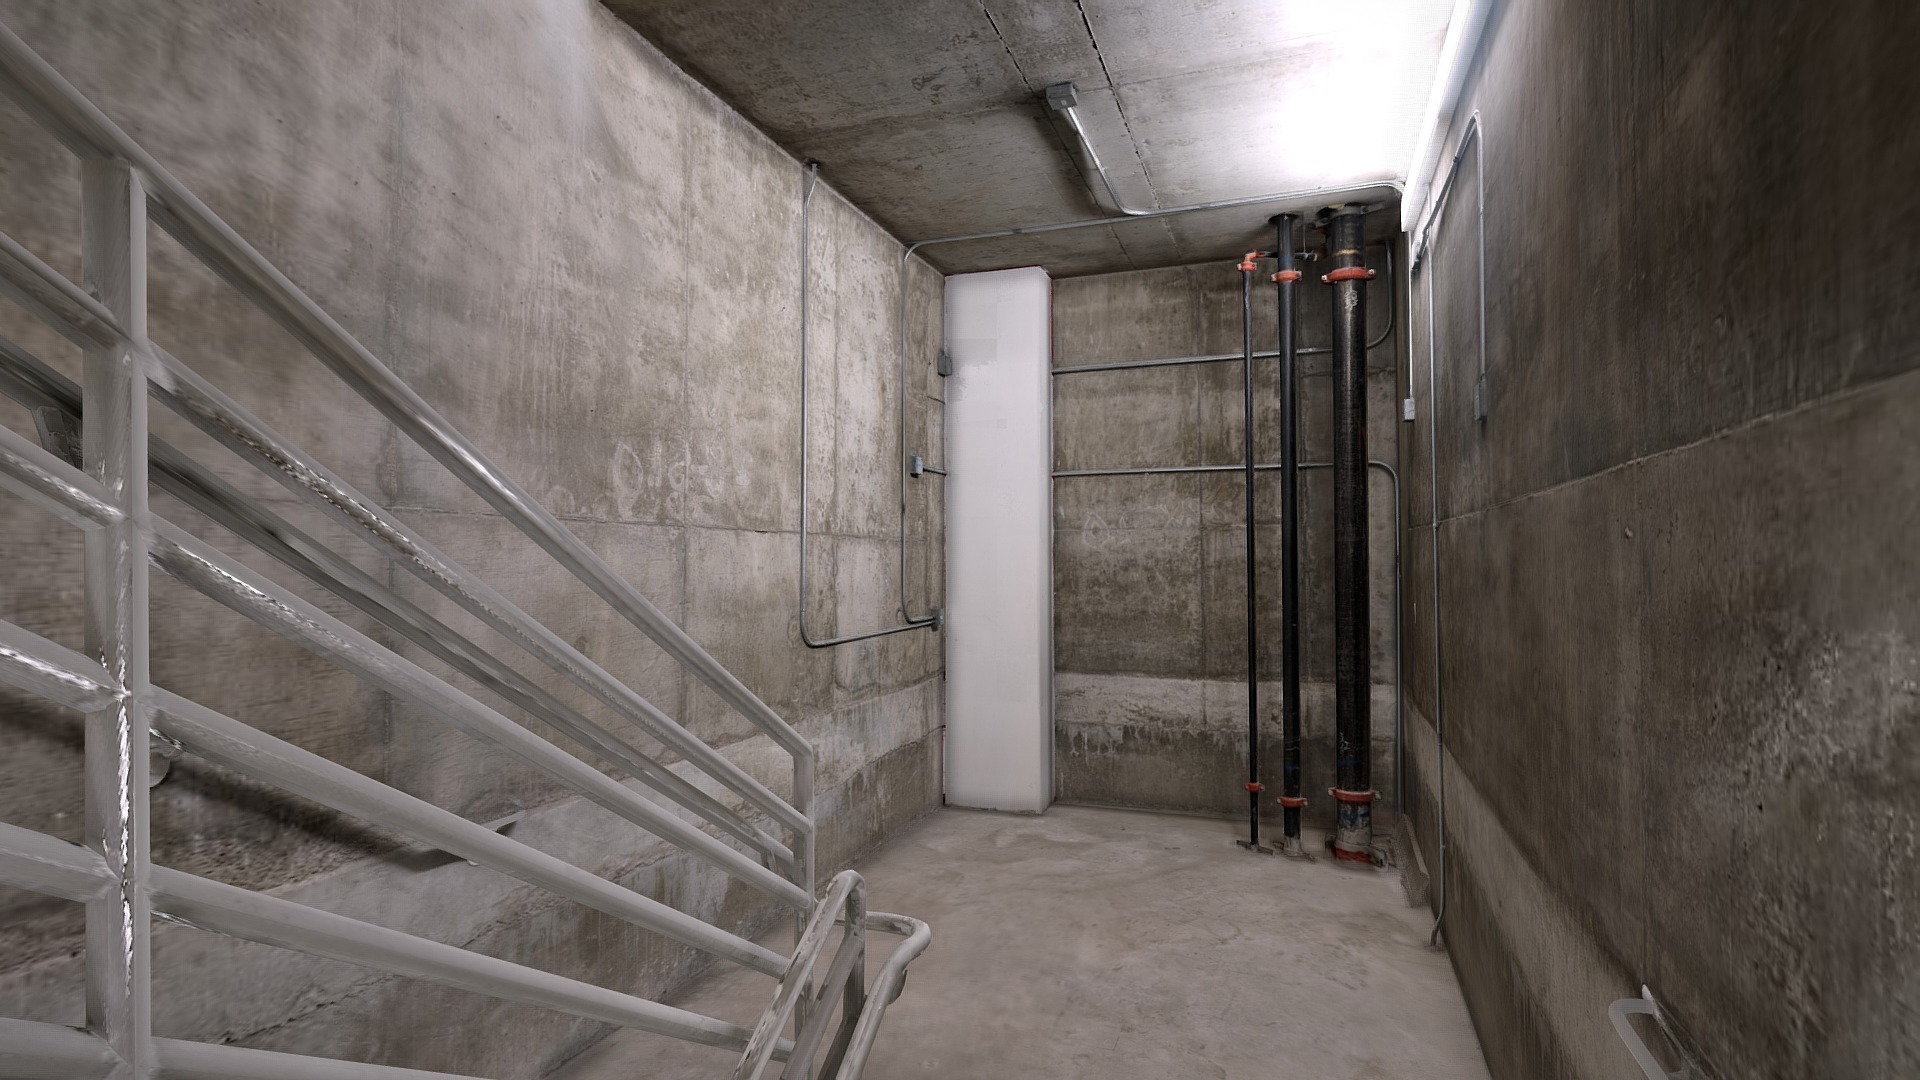 3D model Scary Stairwell VR lowpoly photoscan environment - This is a 3D model of the Scary Stairwell VR lowpoly photoscan environment. The 3D model is about a staircase in a building.